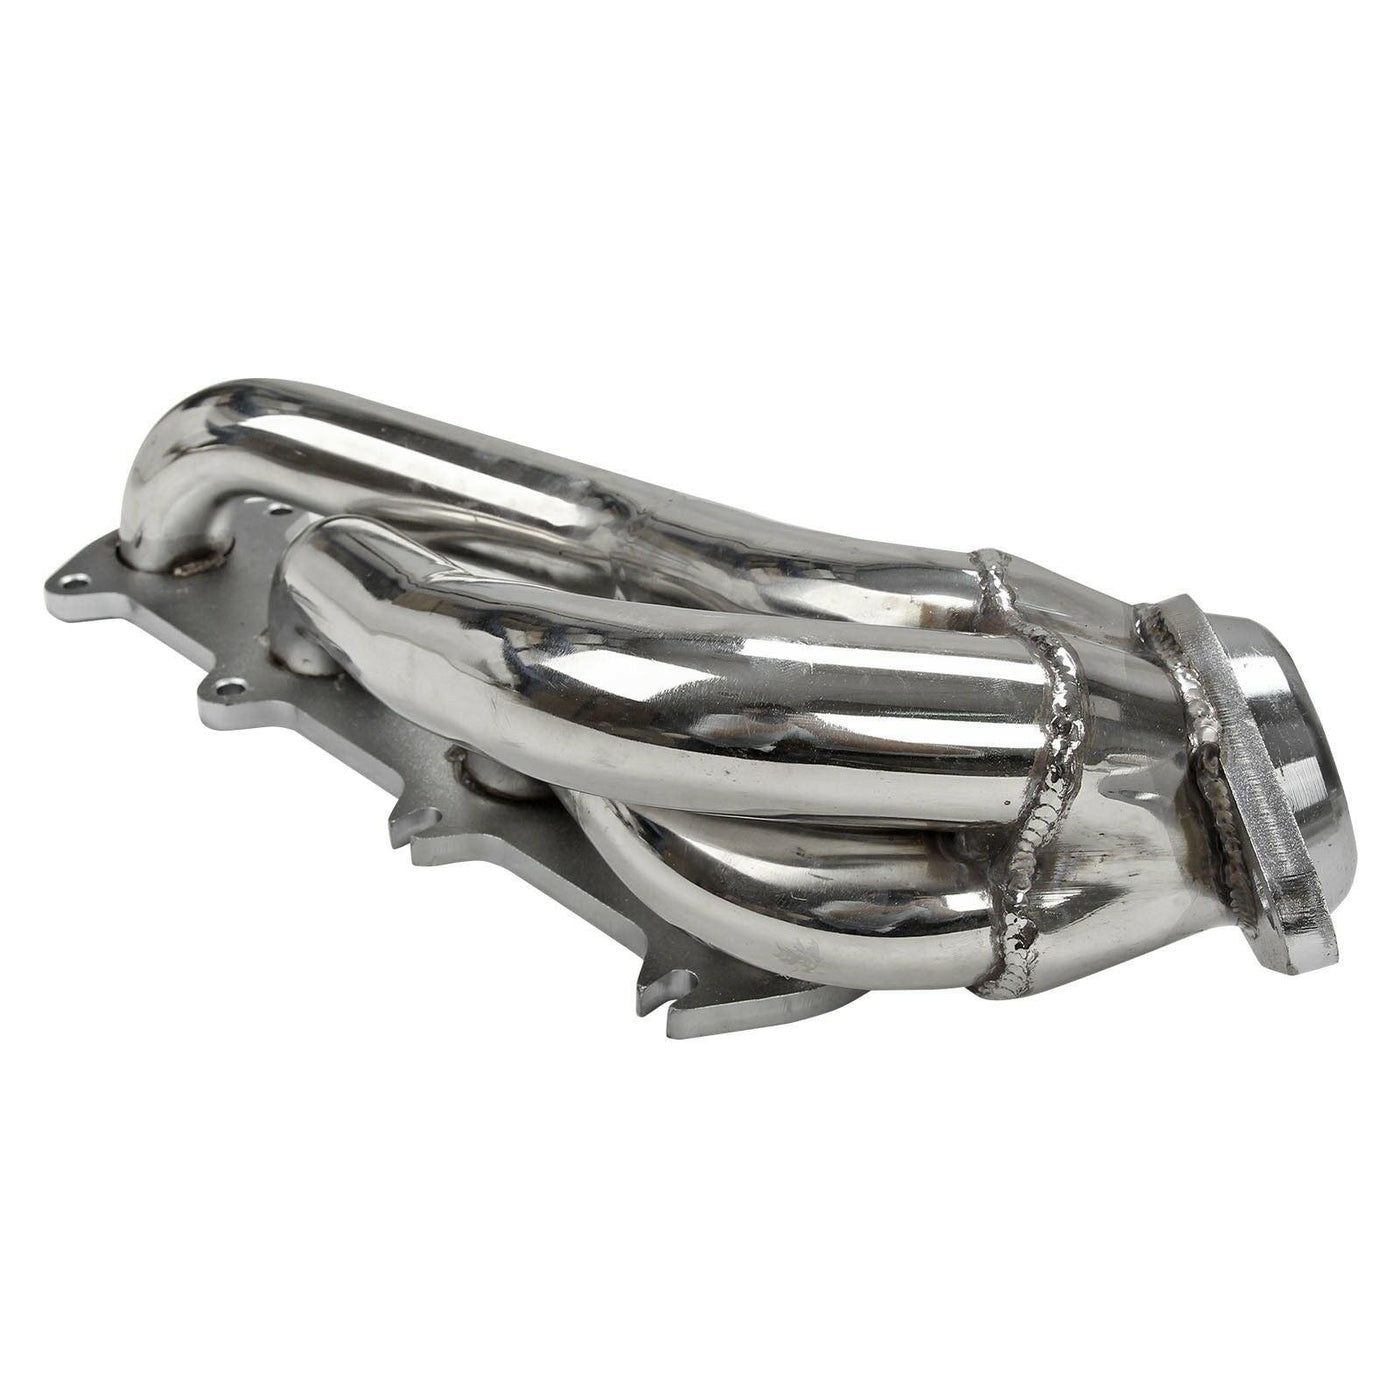 For Ford F150 04-10 5.4L V8 Stainless Exhaust Manifold Shorty Headers manifold - Moto Life Products